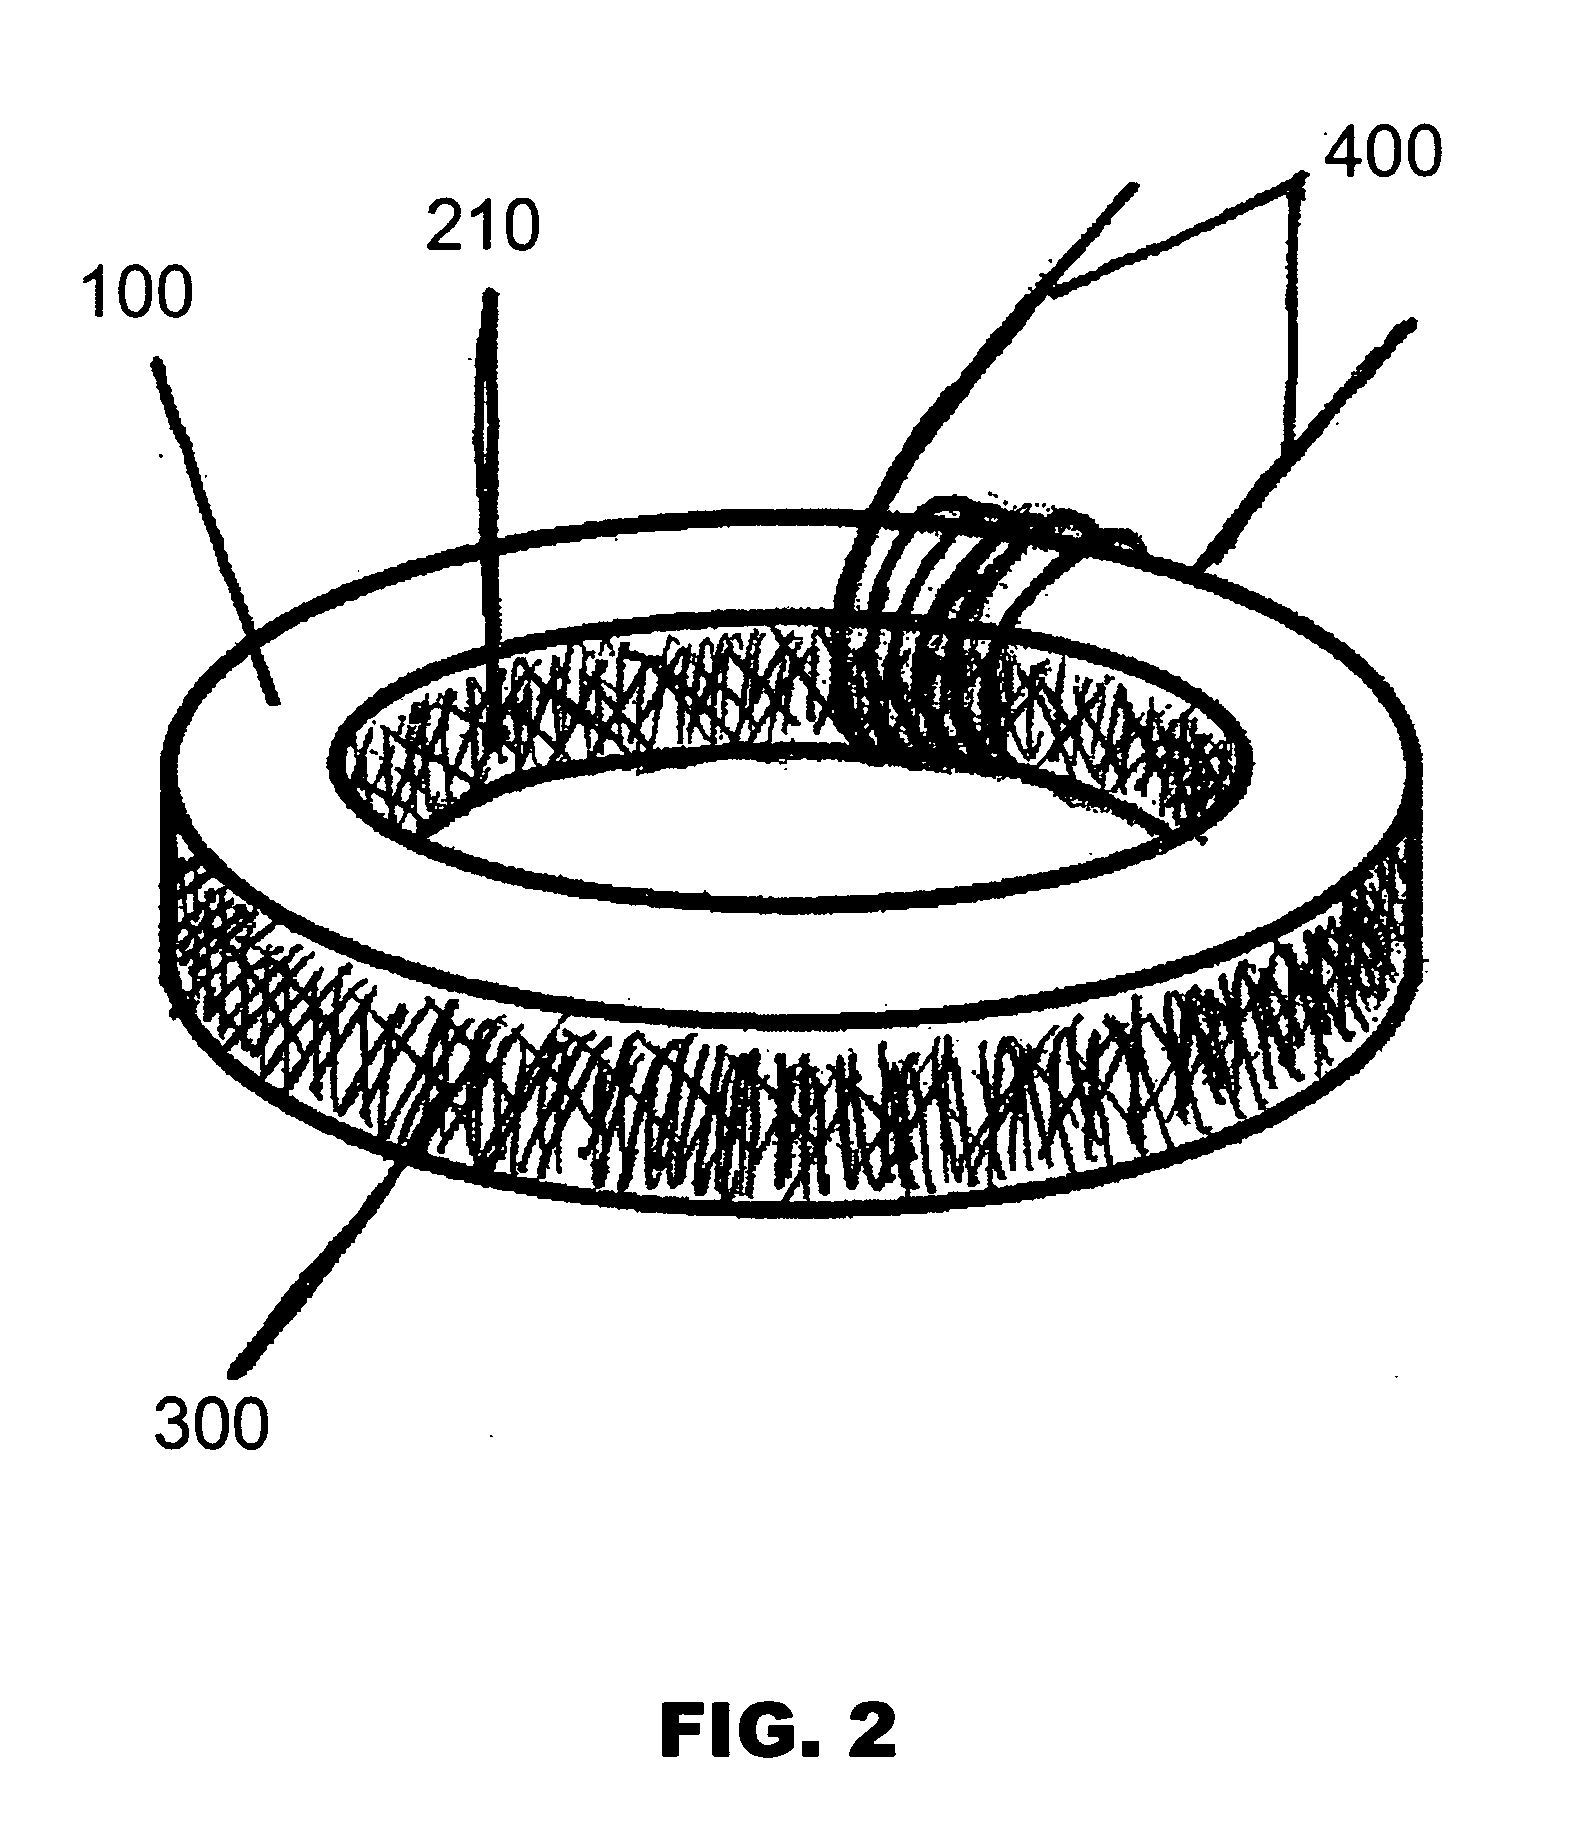 Method for producing thrusts with "Mach" effects manipulated by alternating electromagnetic fields